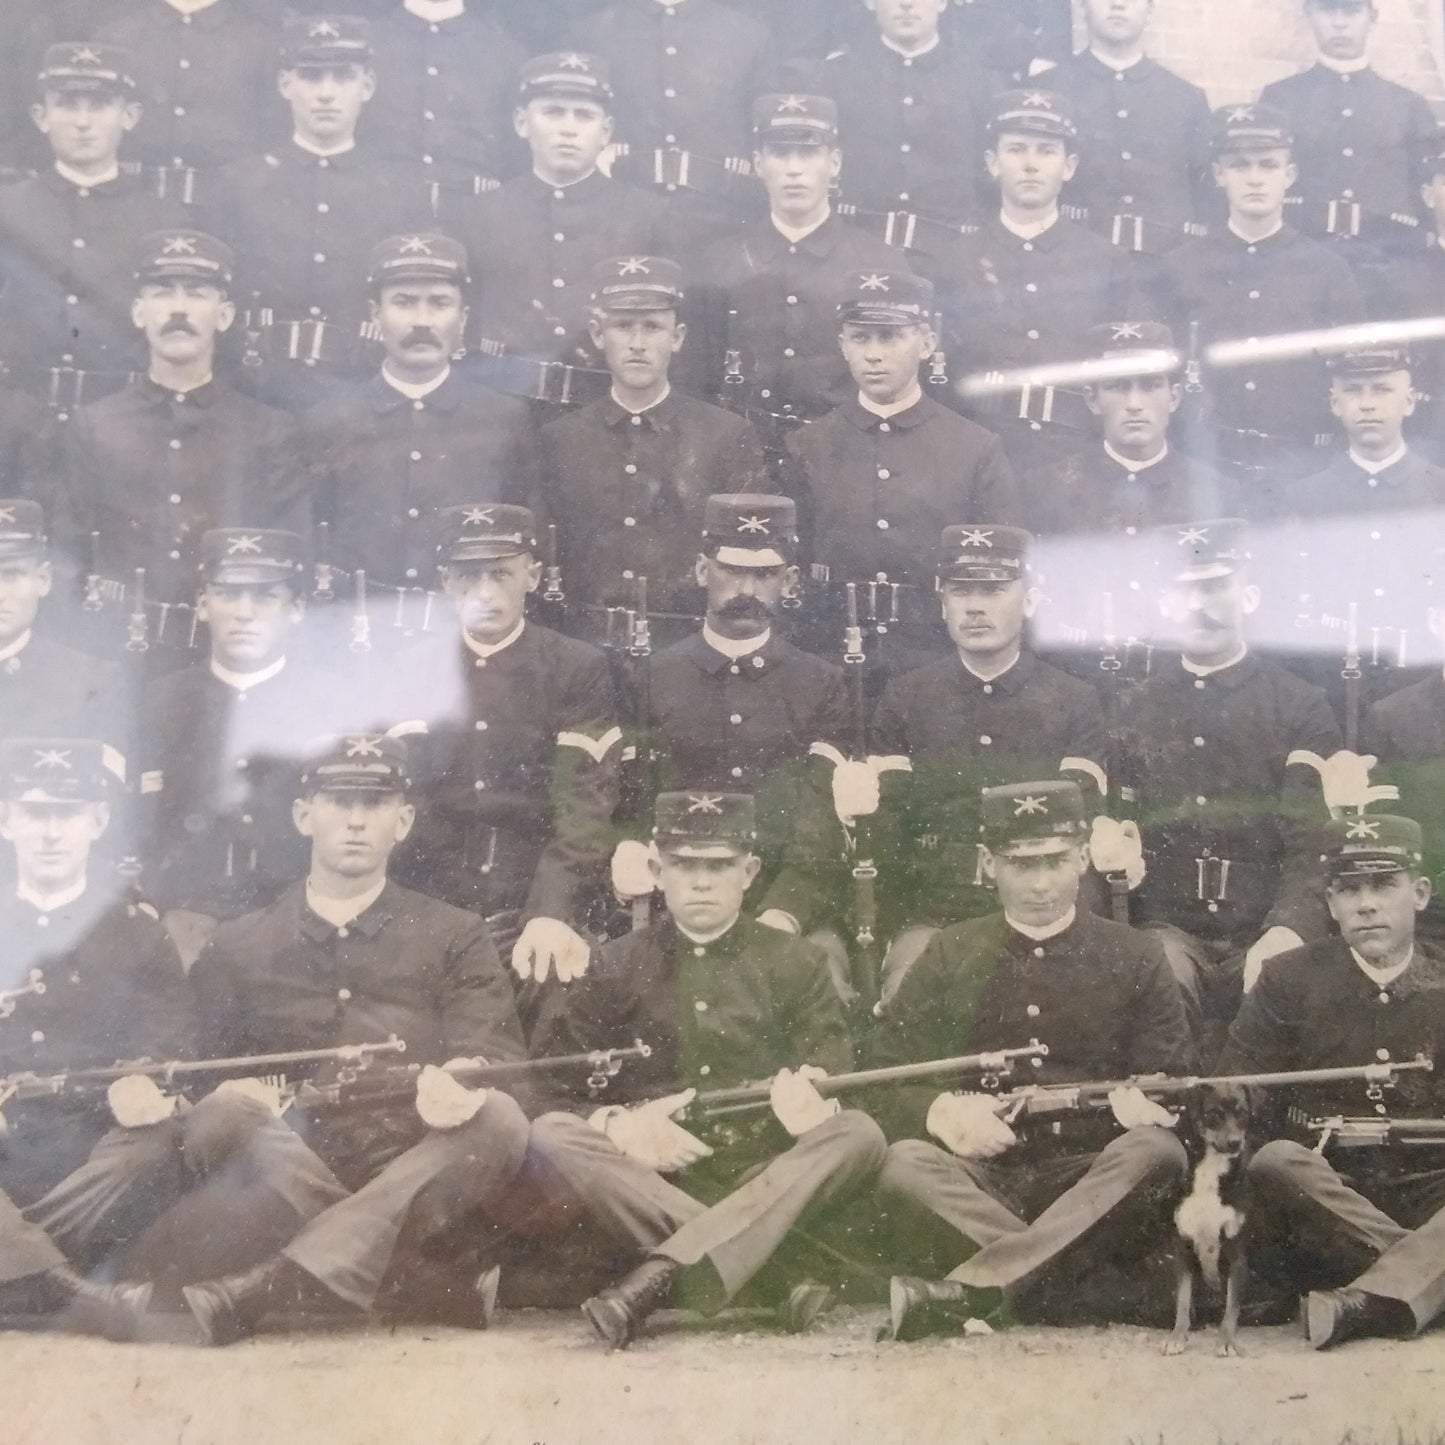 Framed Portrait of Eighth Infantry Division, Company K, at Fort Snelling, Minnesota c. 1900